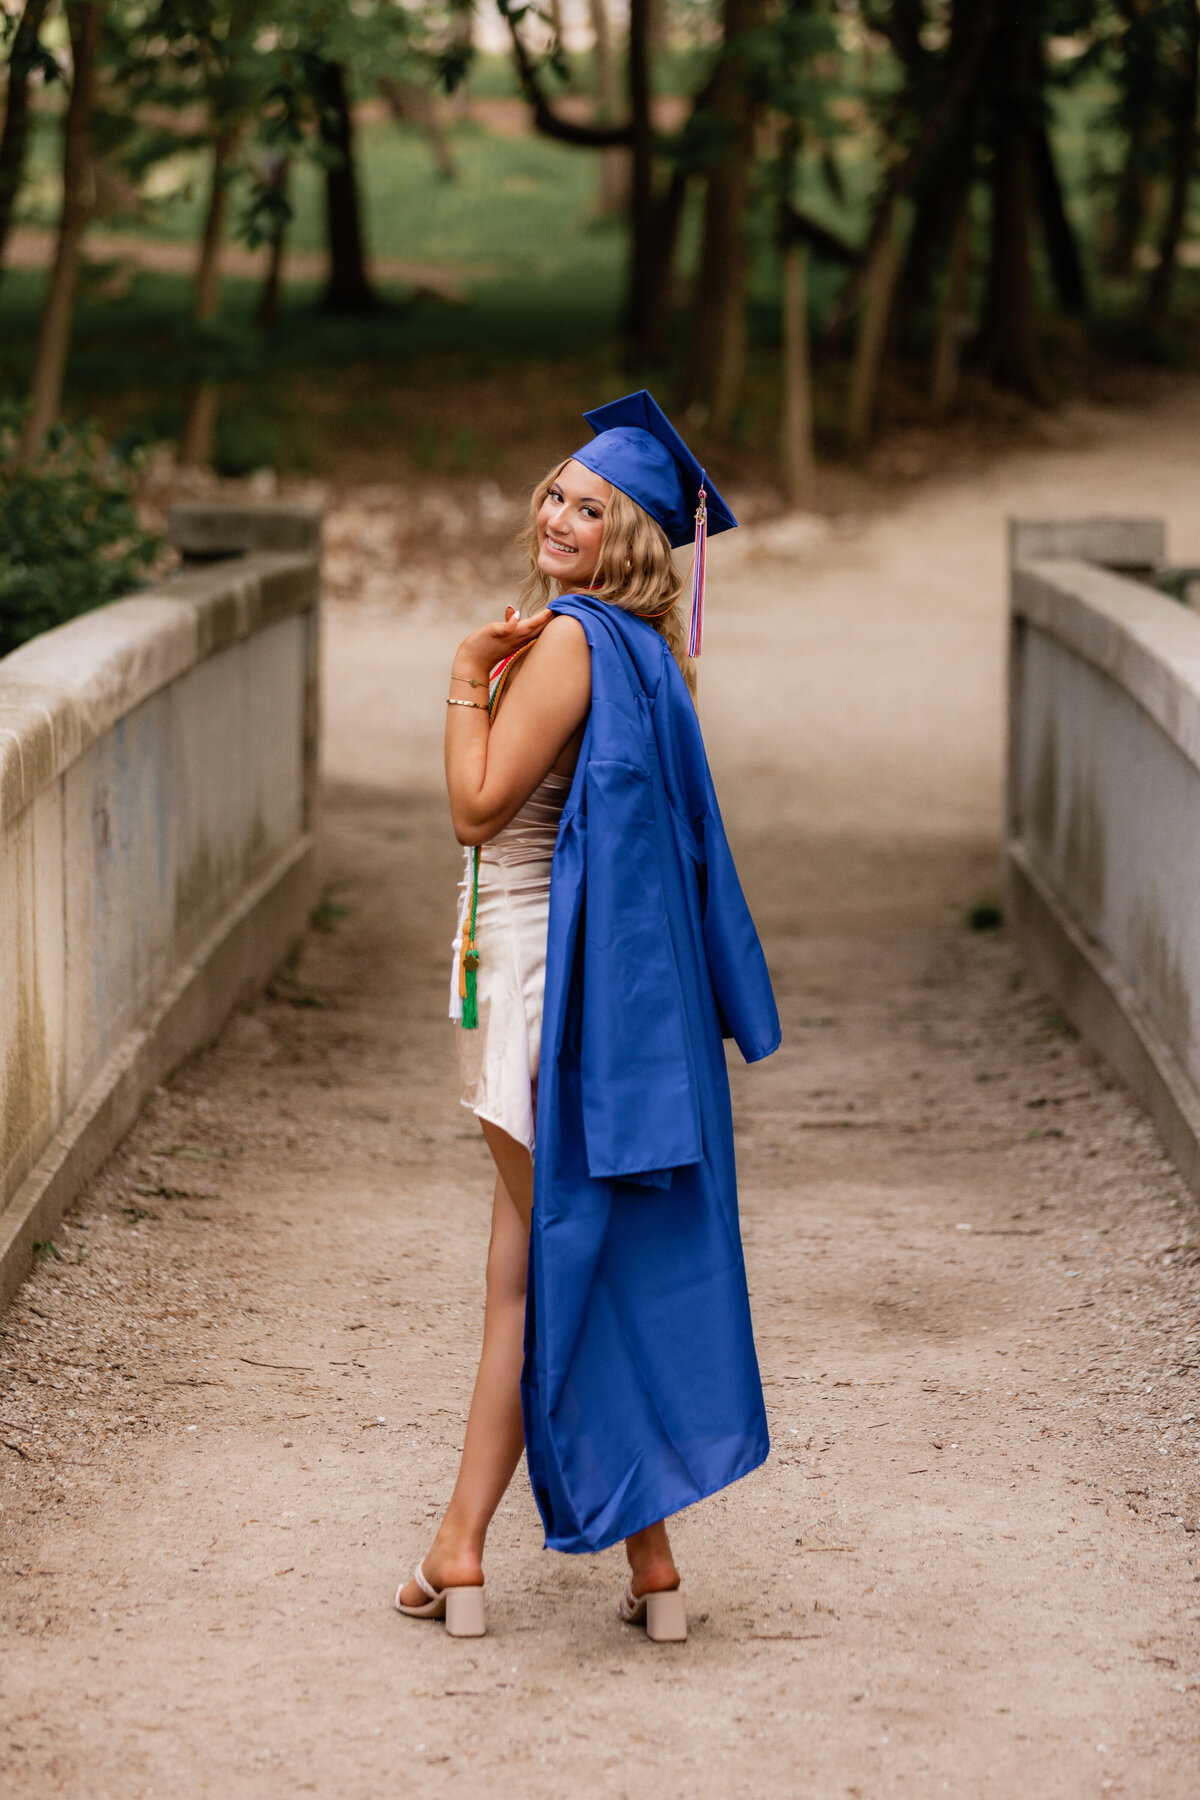 A portrait of a girl in her blue cap and gown at Delwood Park.